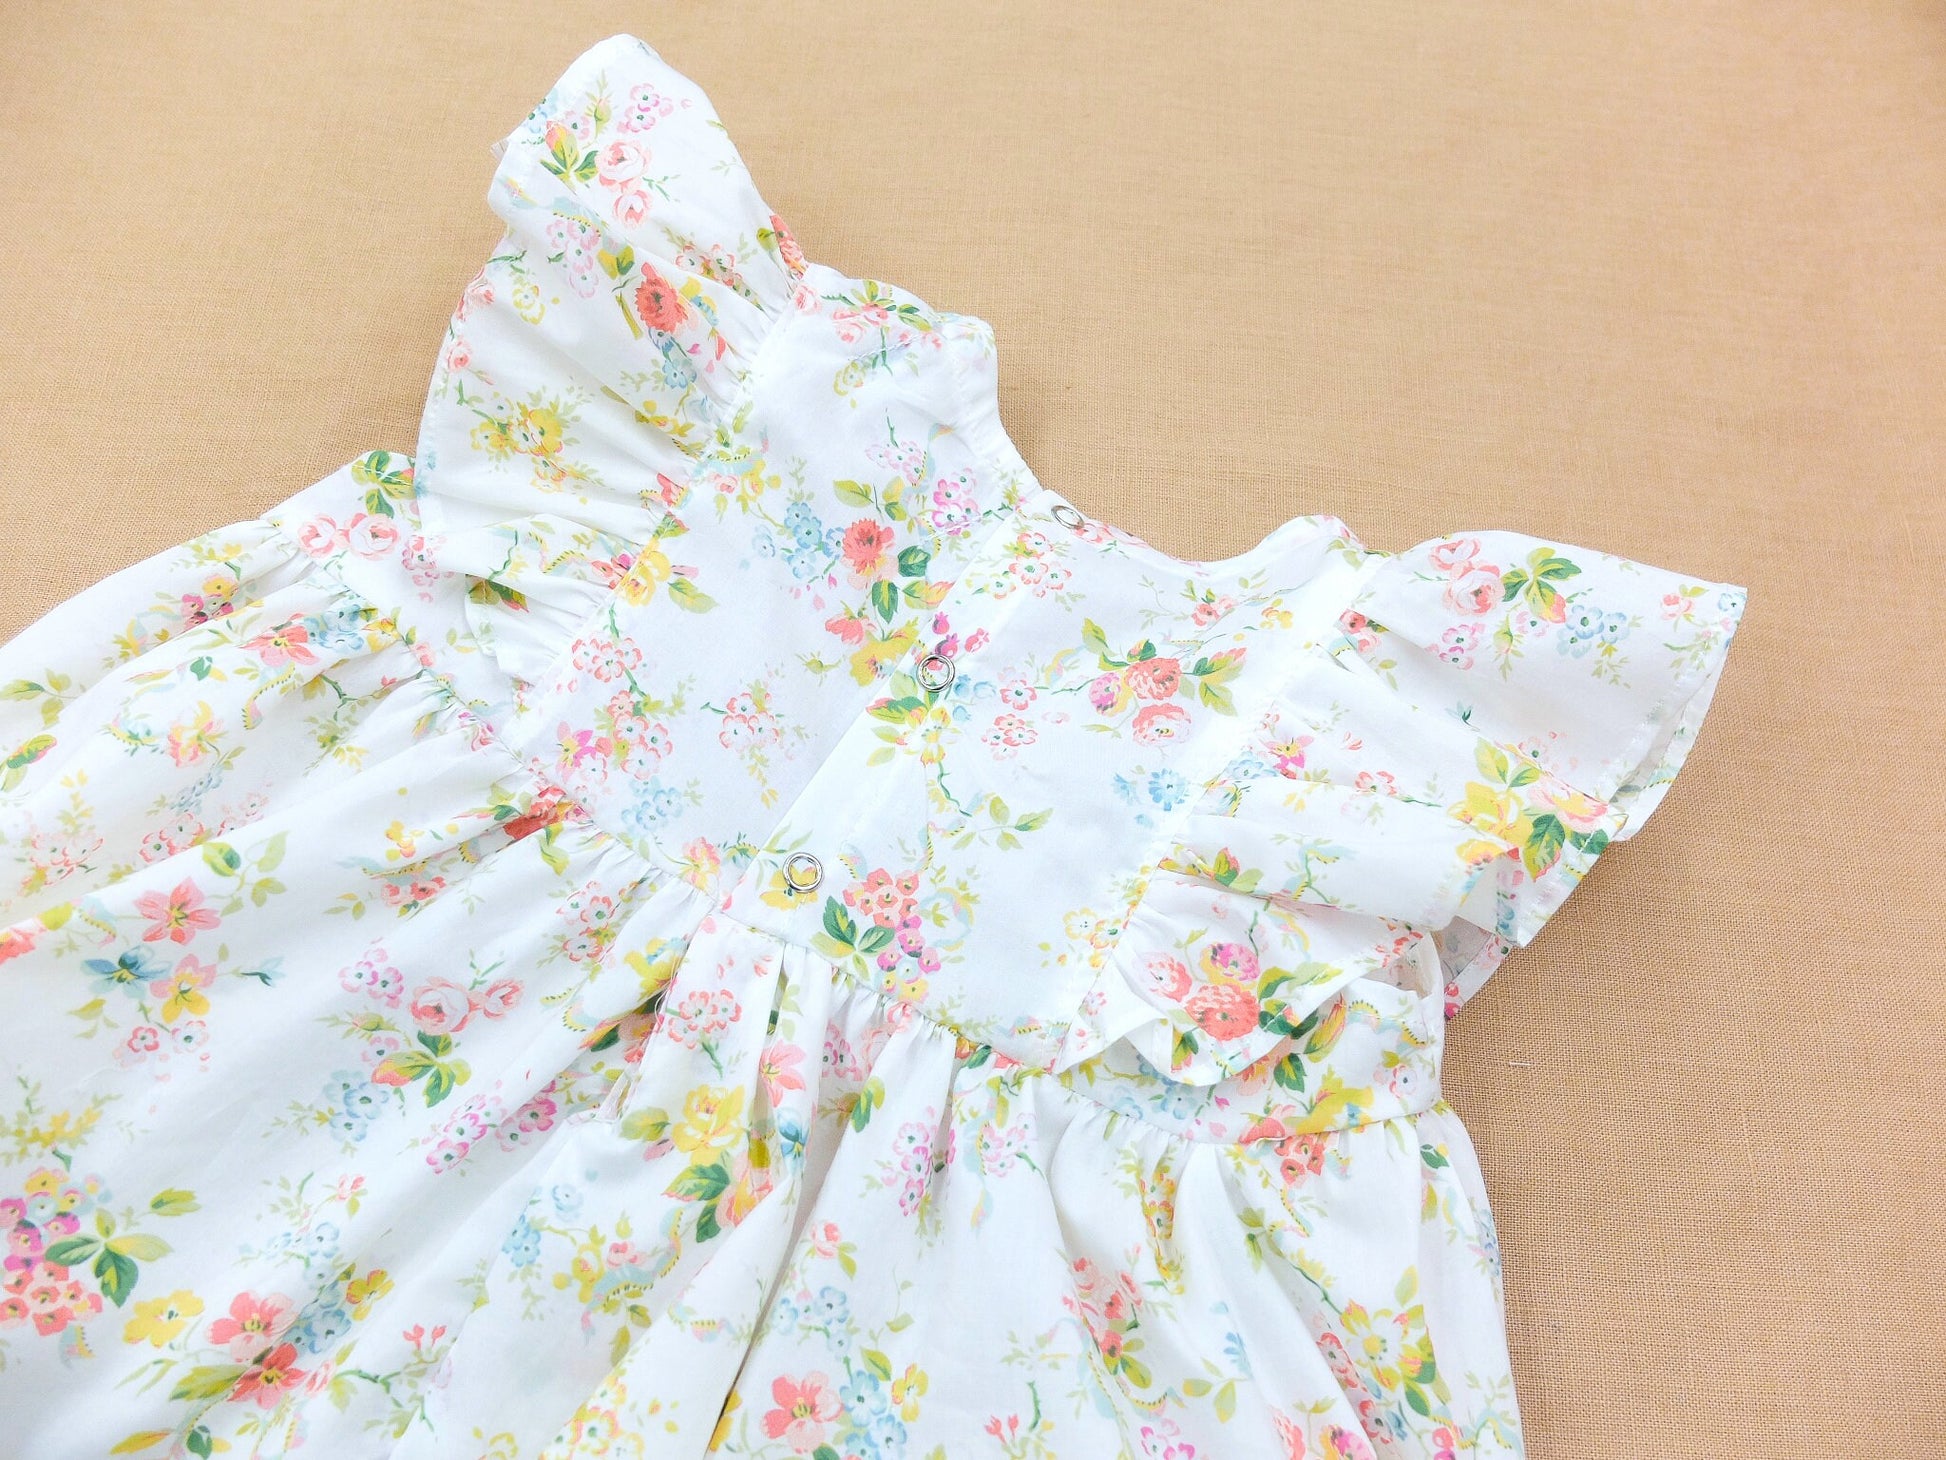 Liberty London baby m and m bubble romper organic cotton, floral animal print, wedding baptism christening outfits first birthday long short sleeves sleeveless, eastern thanksgiving halloween Christmas new born ruffle Peter Pan scalloped petal collar